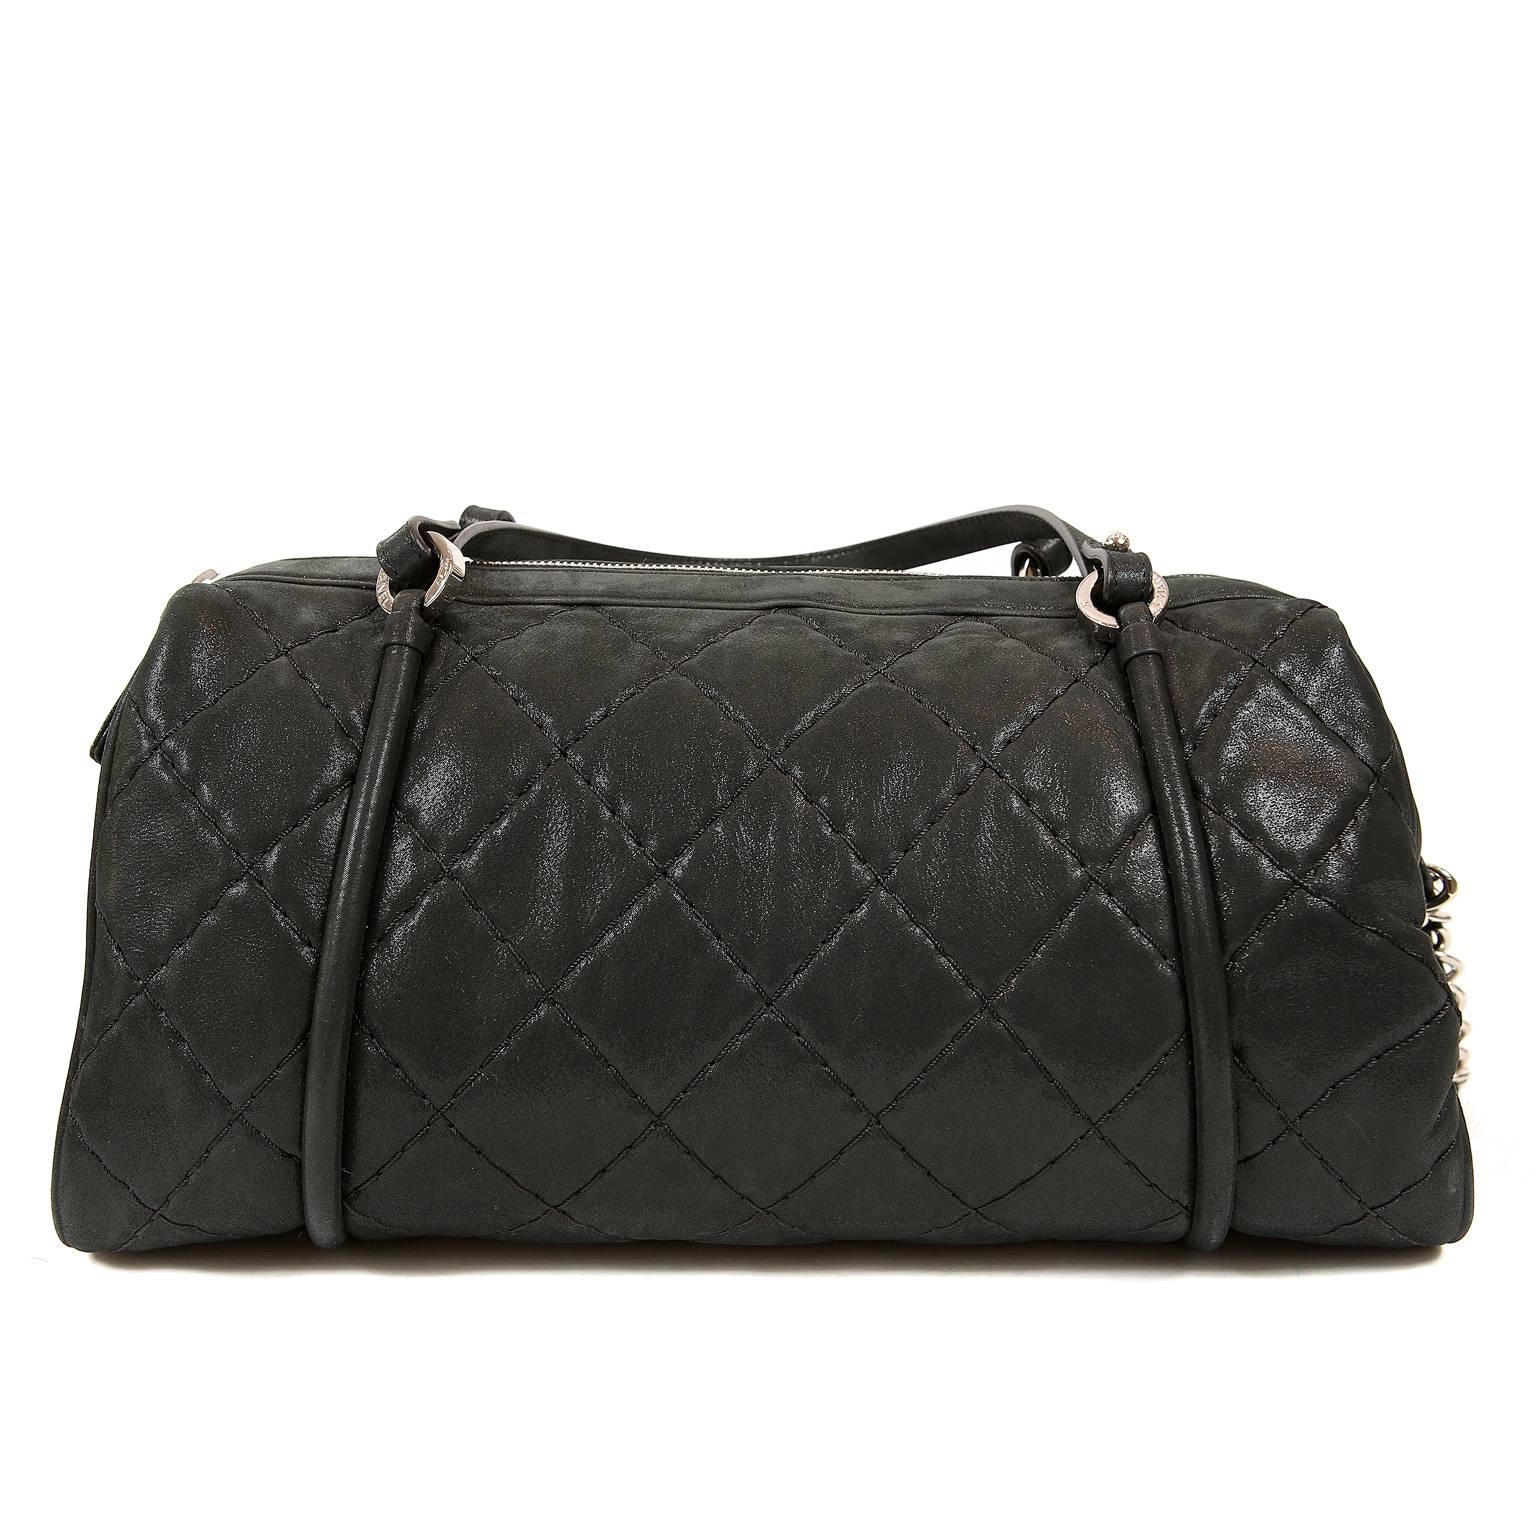  Chanel Black Lambskin Bowler- Pristine, appearing never carried. 
 Perfect for every day, the bowler is a classic silhouette.  The addition of an optional shoulder strap makes it a brilliant addition to any collection.  
Black brushed lambskin is